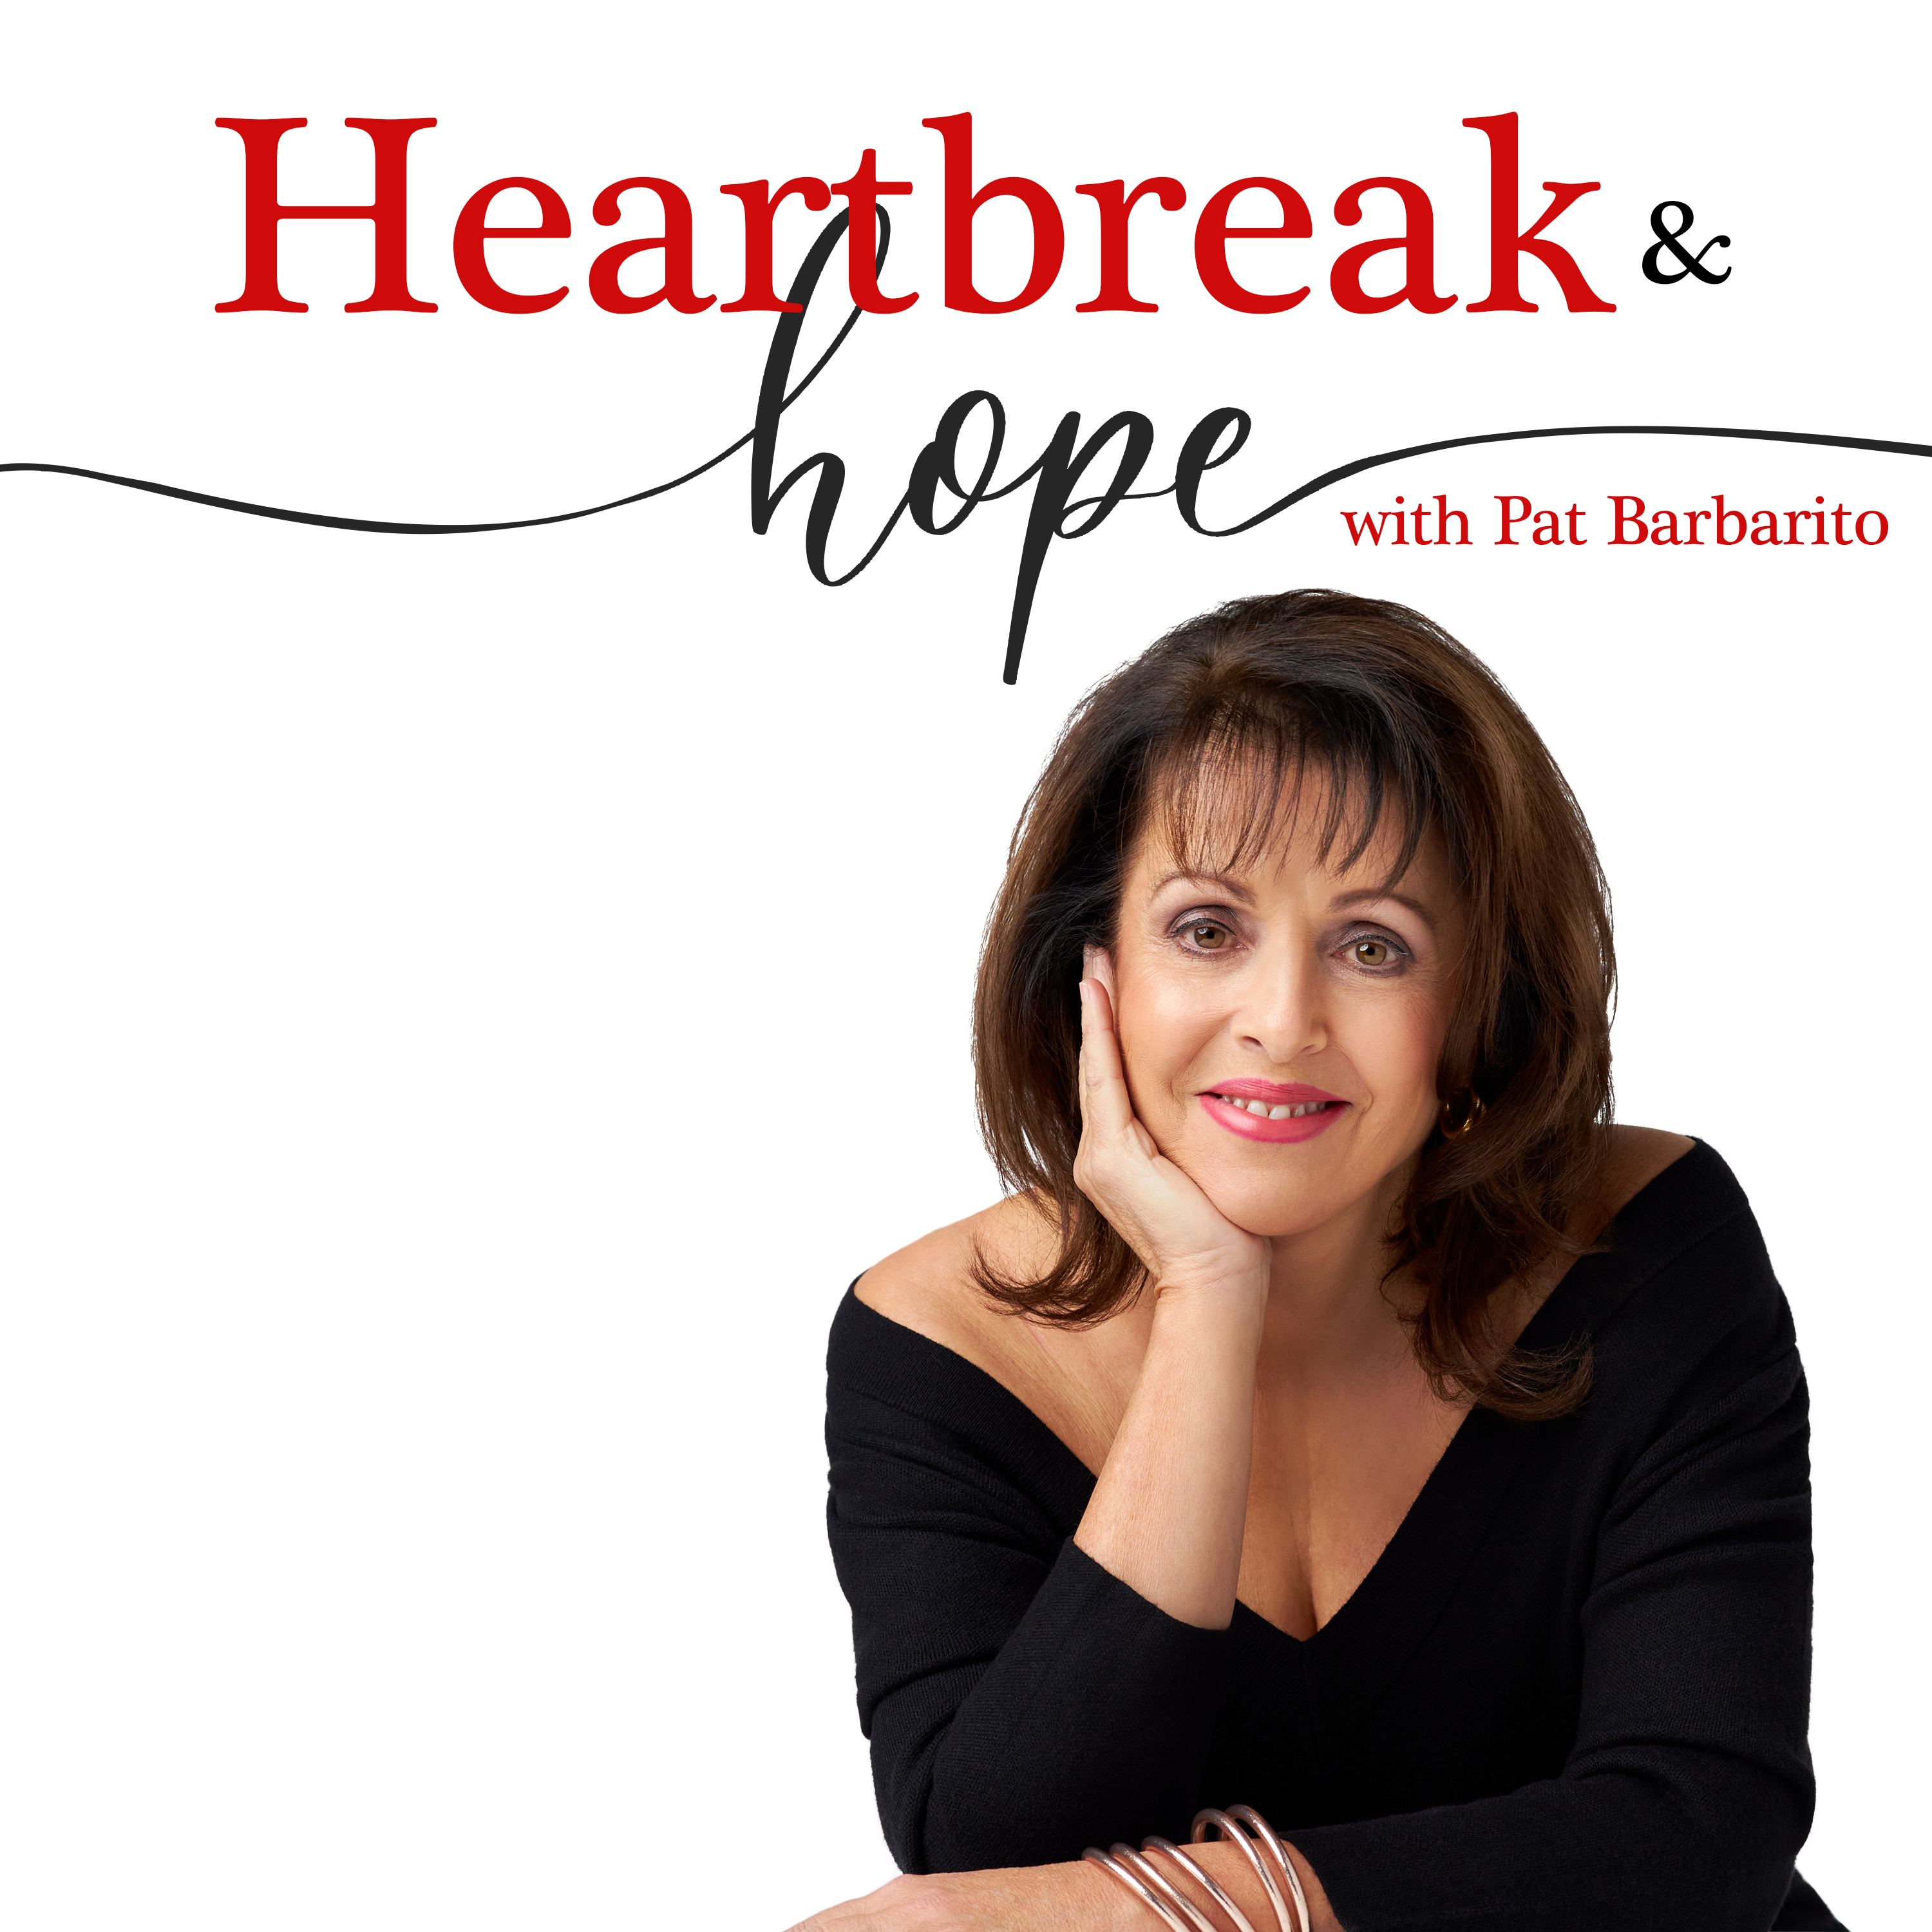 Welcome to Heartbreak and Hope with Pat Barbarito